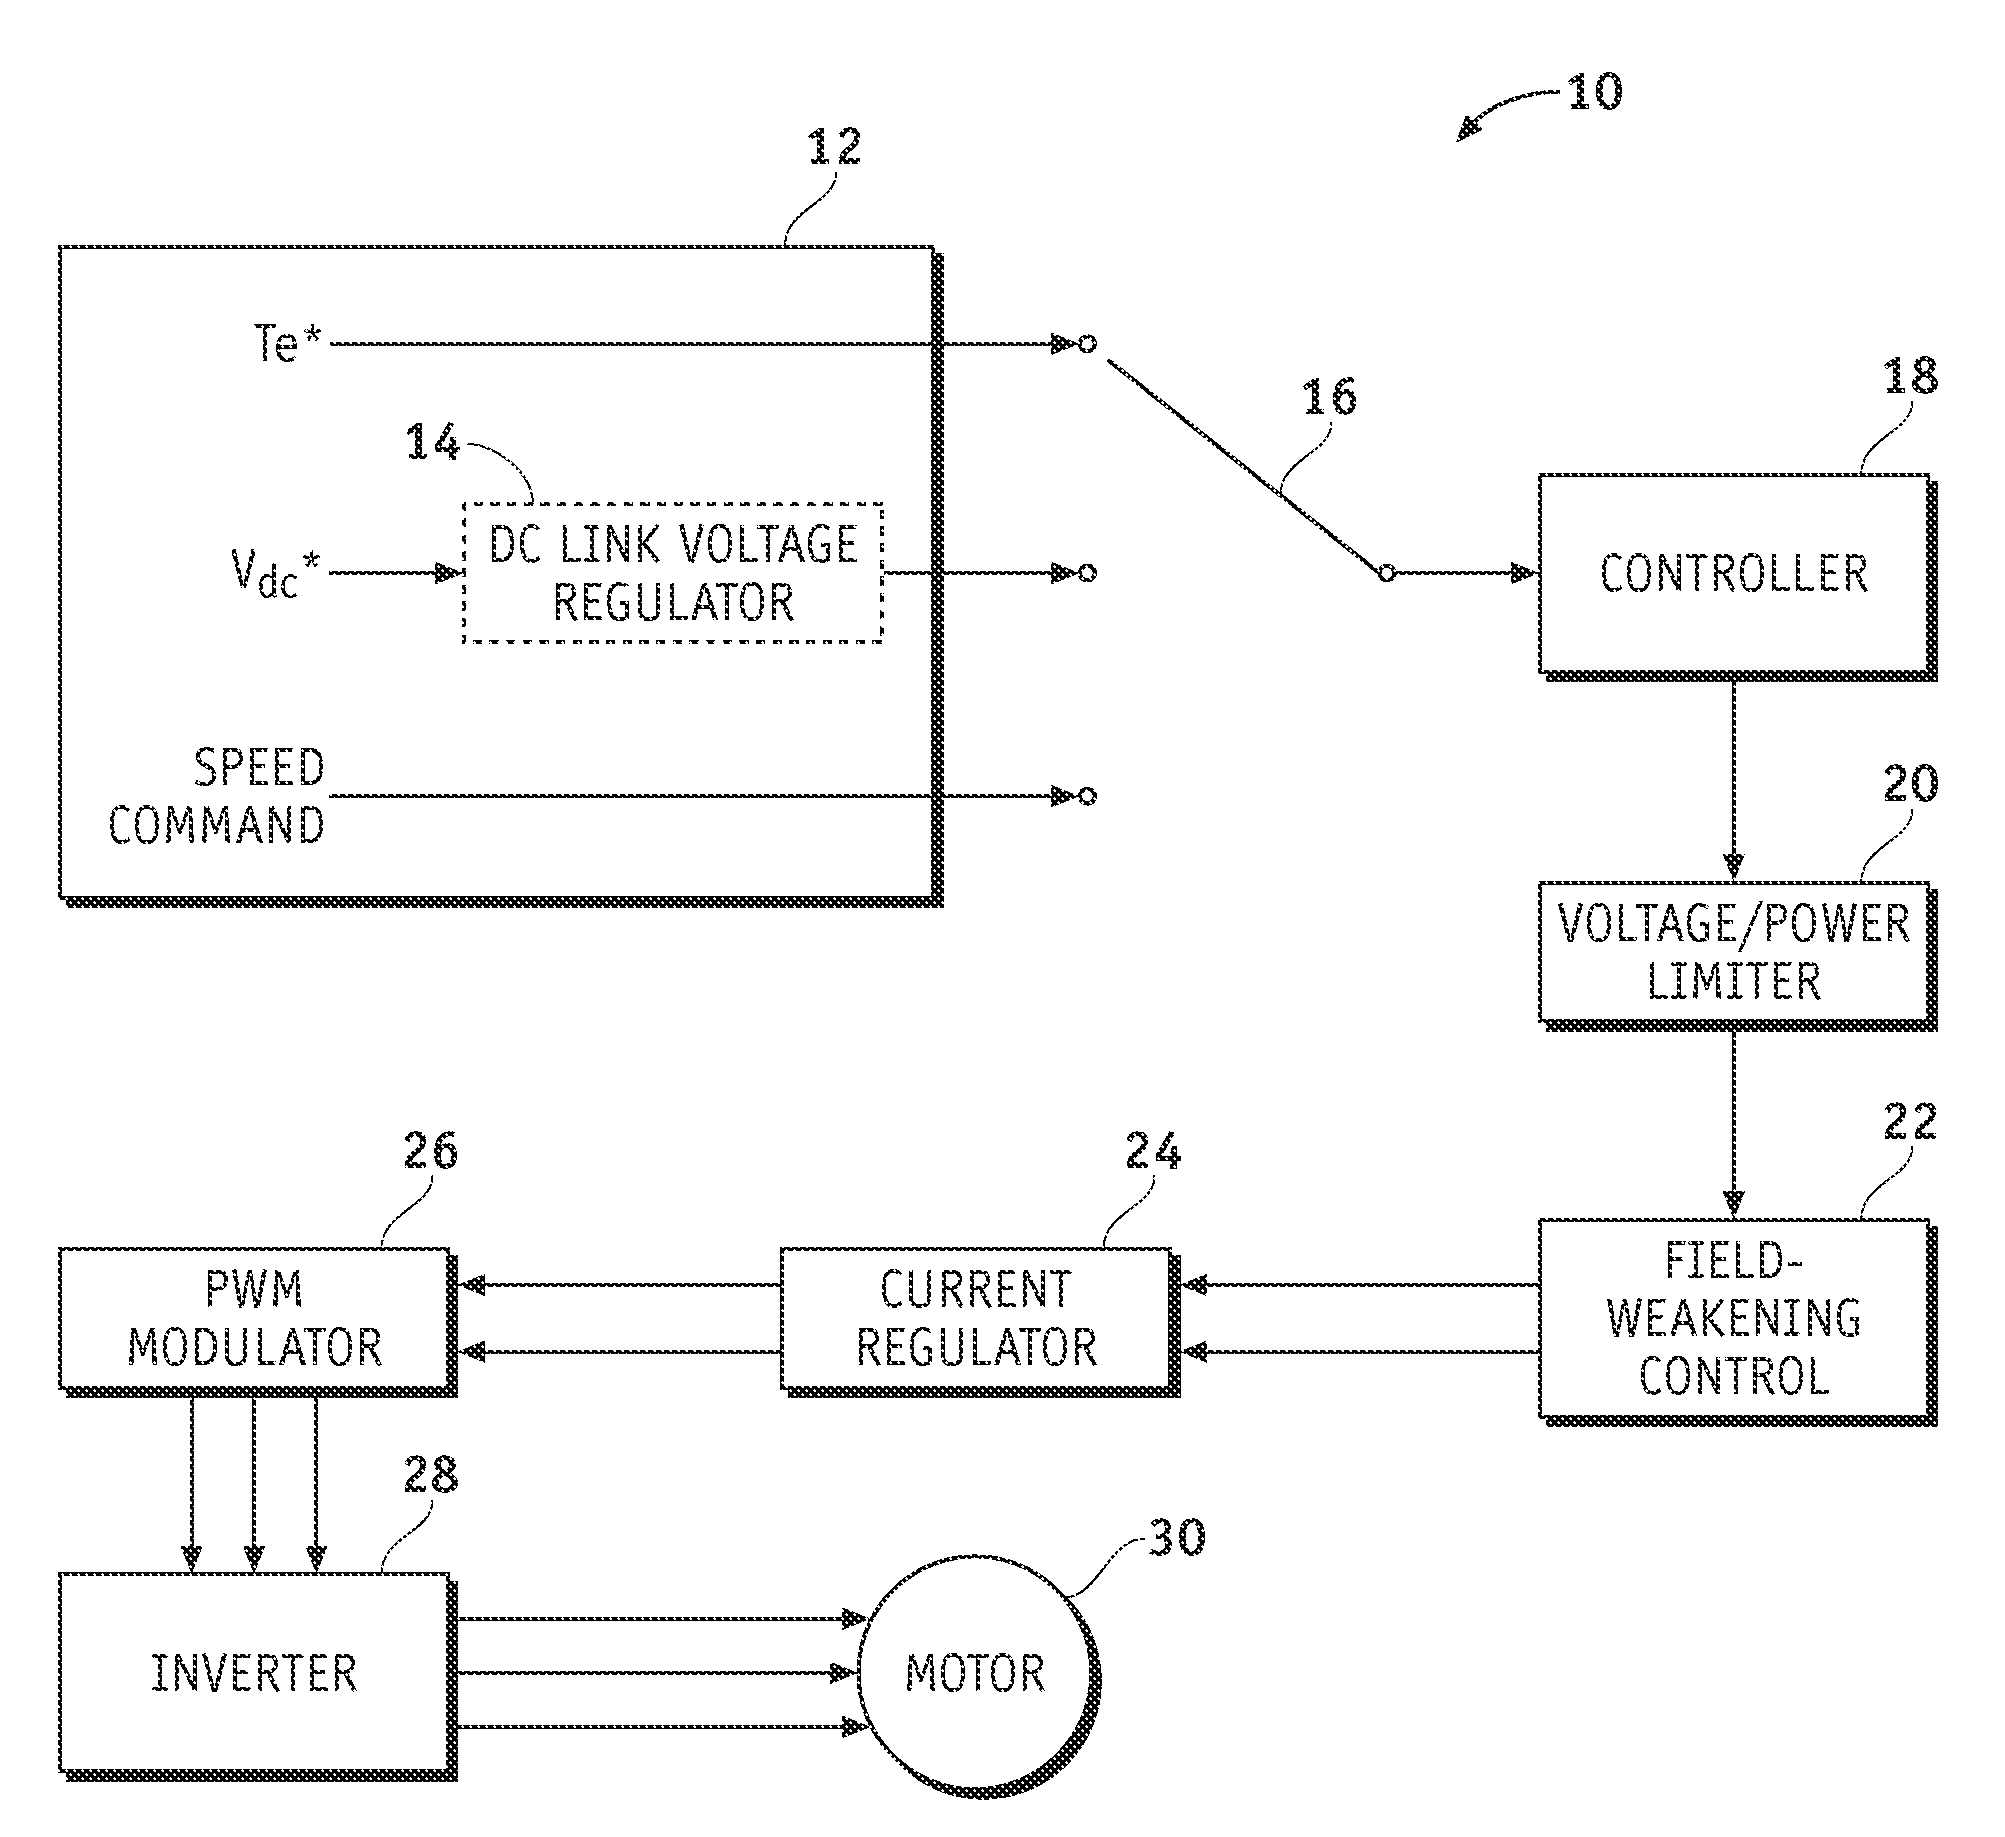 System and method for controlling electric drive systems